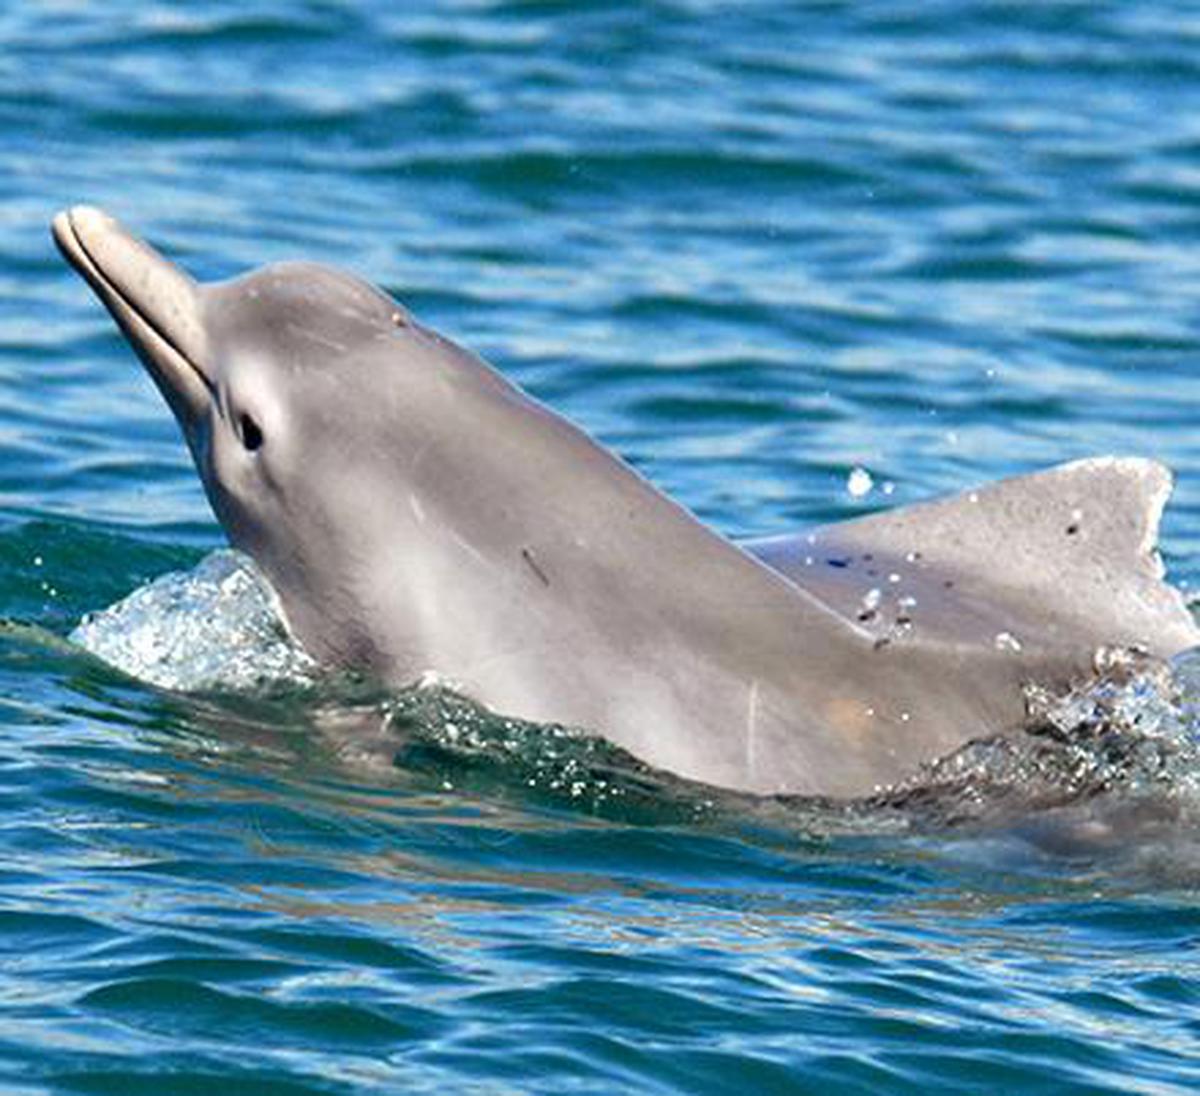 Microplastics found in dolphins' - The Hindu